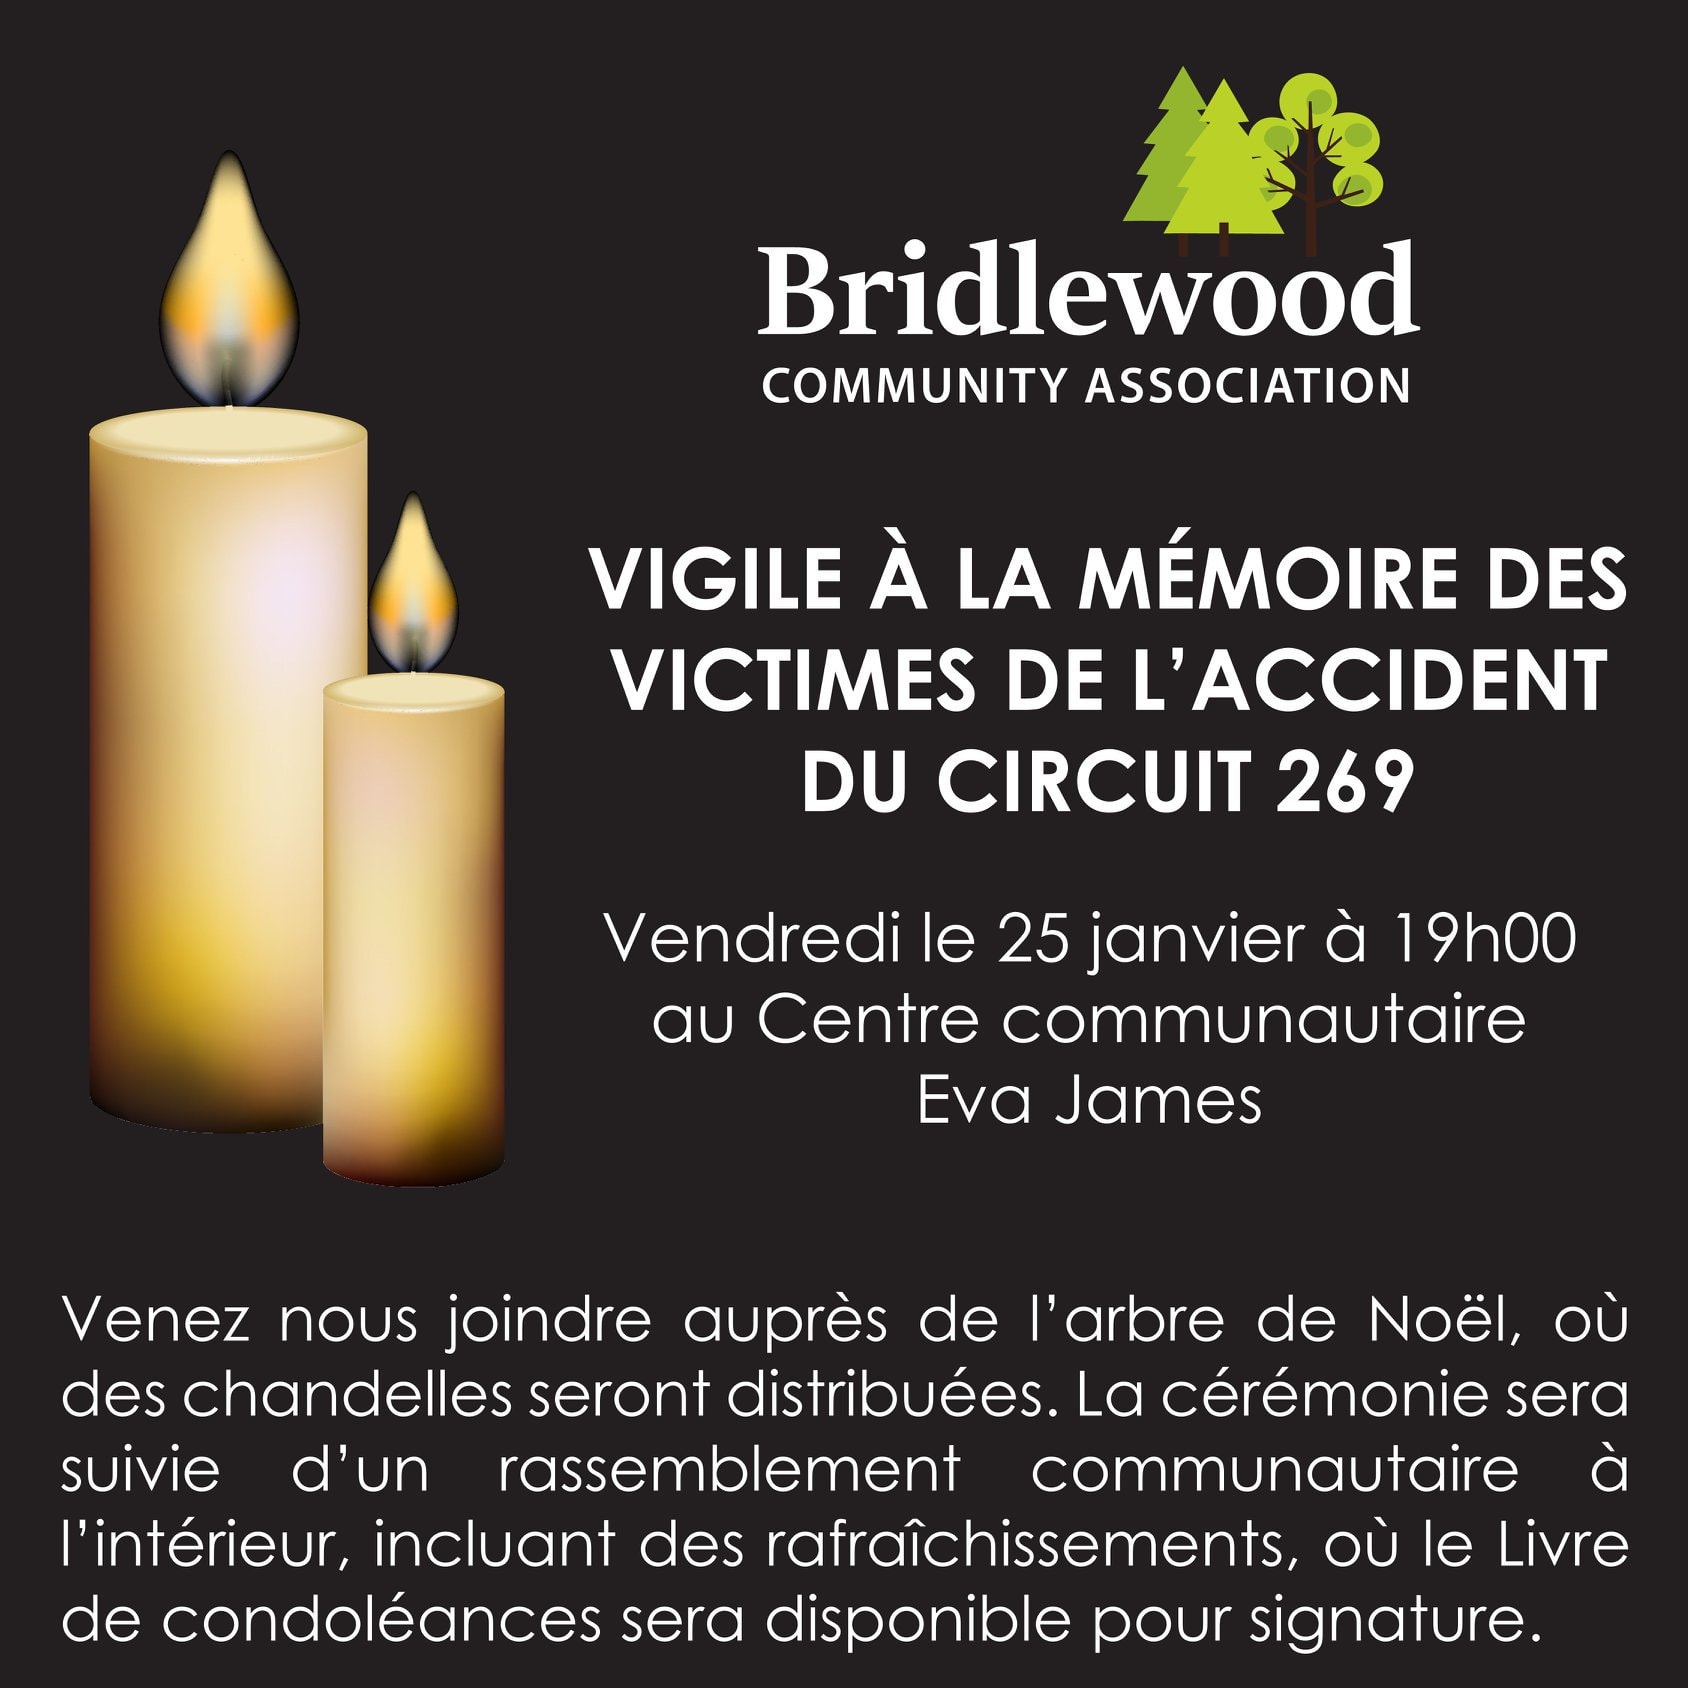 Friday, January 25 at the Eva James Memorial Community Centre (65 Stonehaven Drive) at 7pm for a vigil to remember victims of route 269 accident.